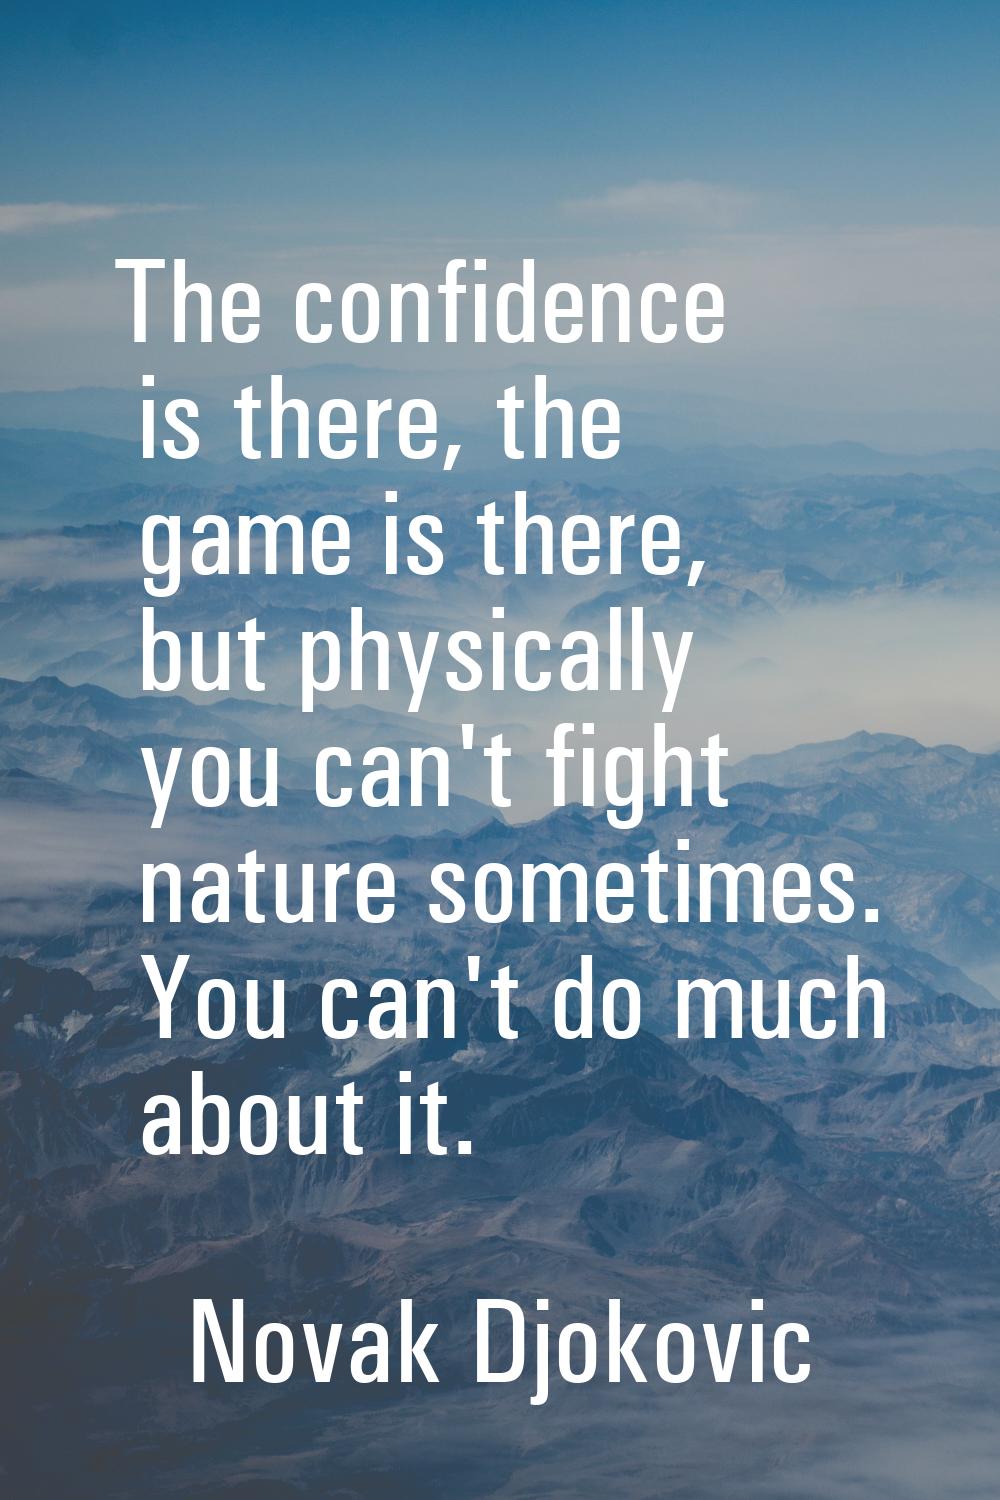 The confidence is there, the game is there, but physically you can't fight nature sometimes. You ca